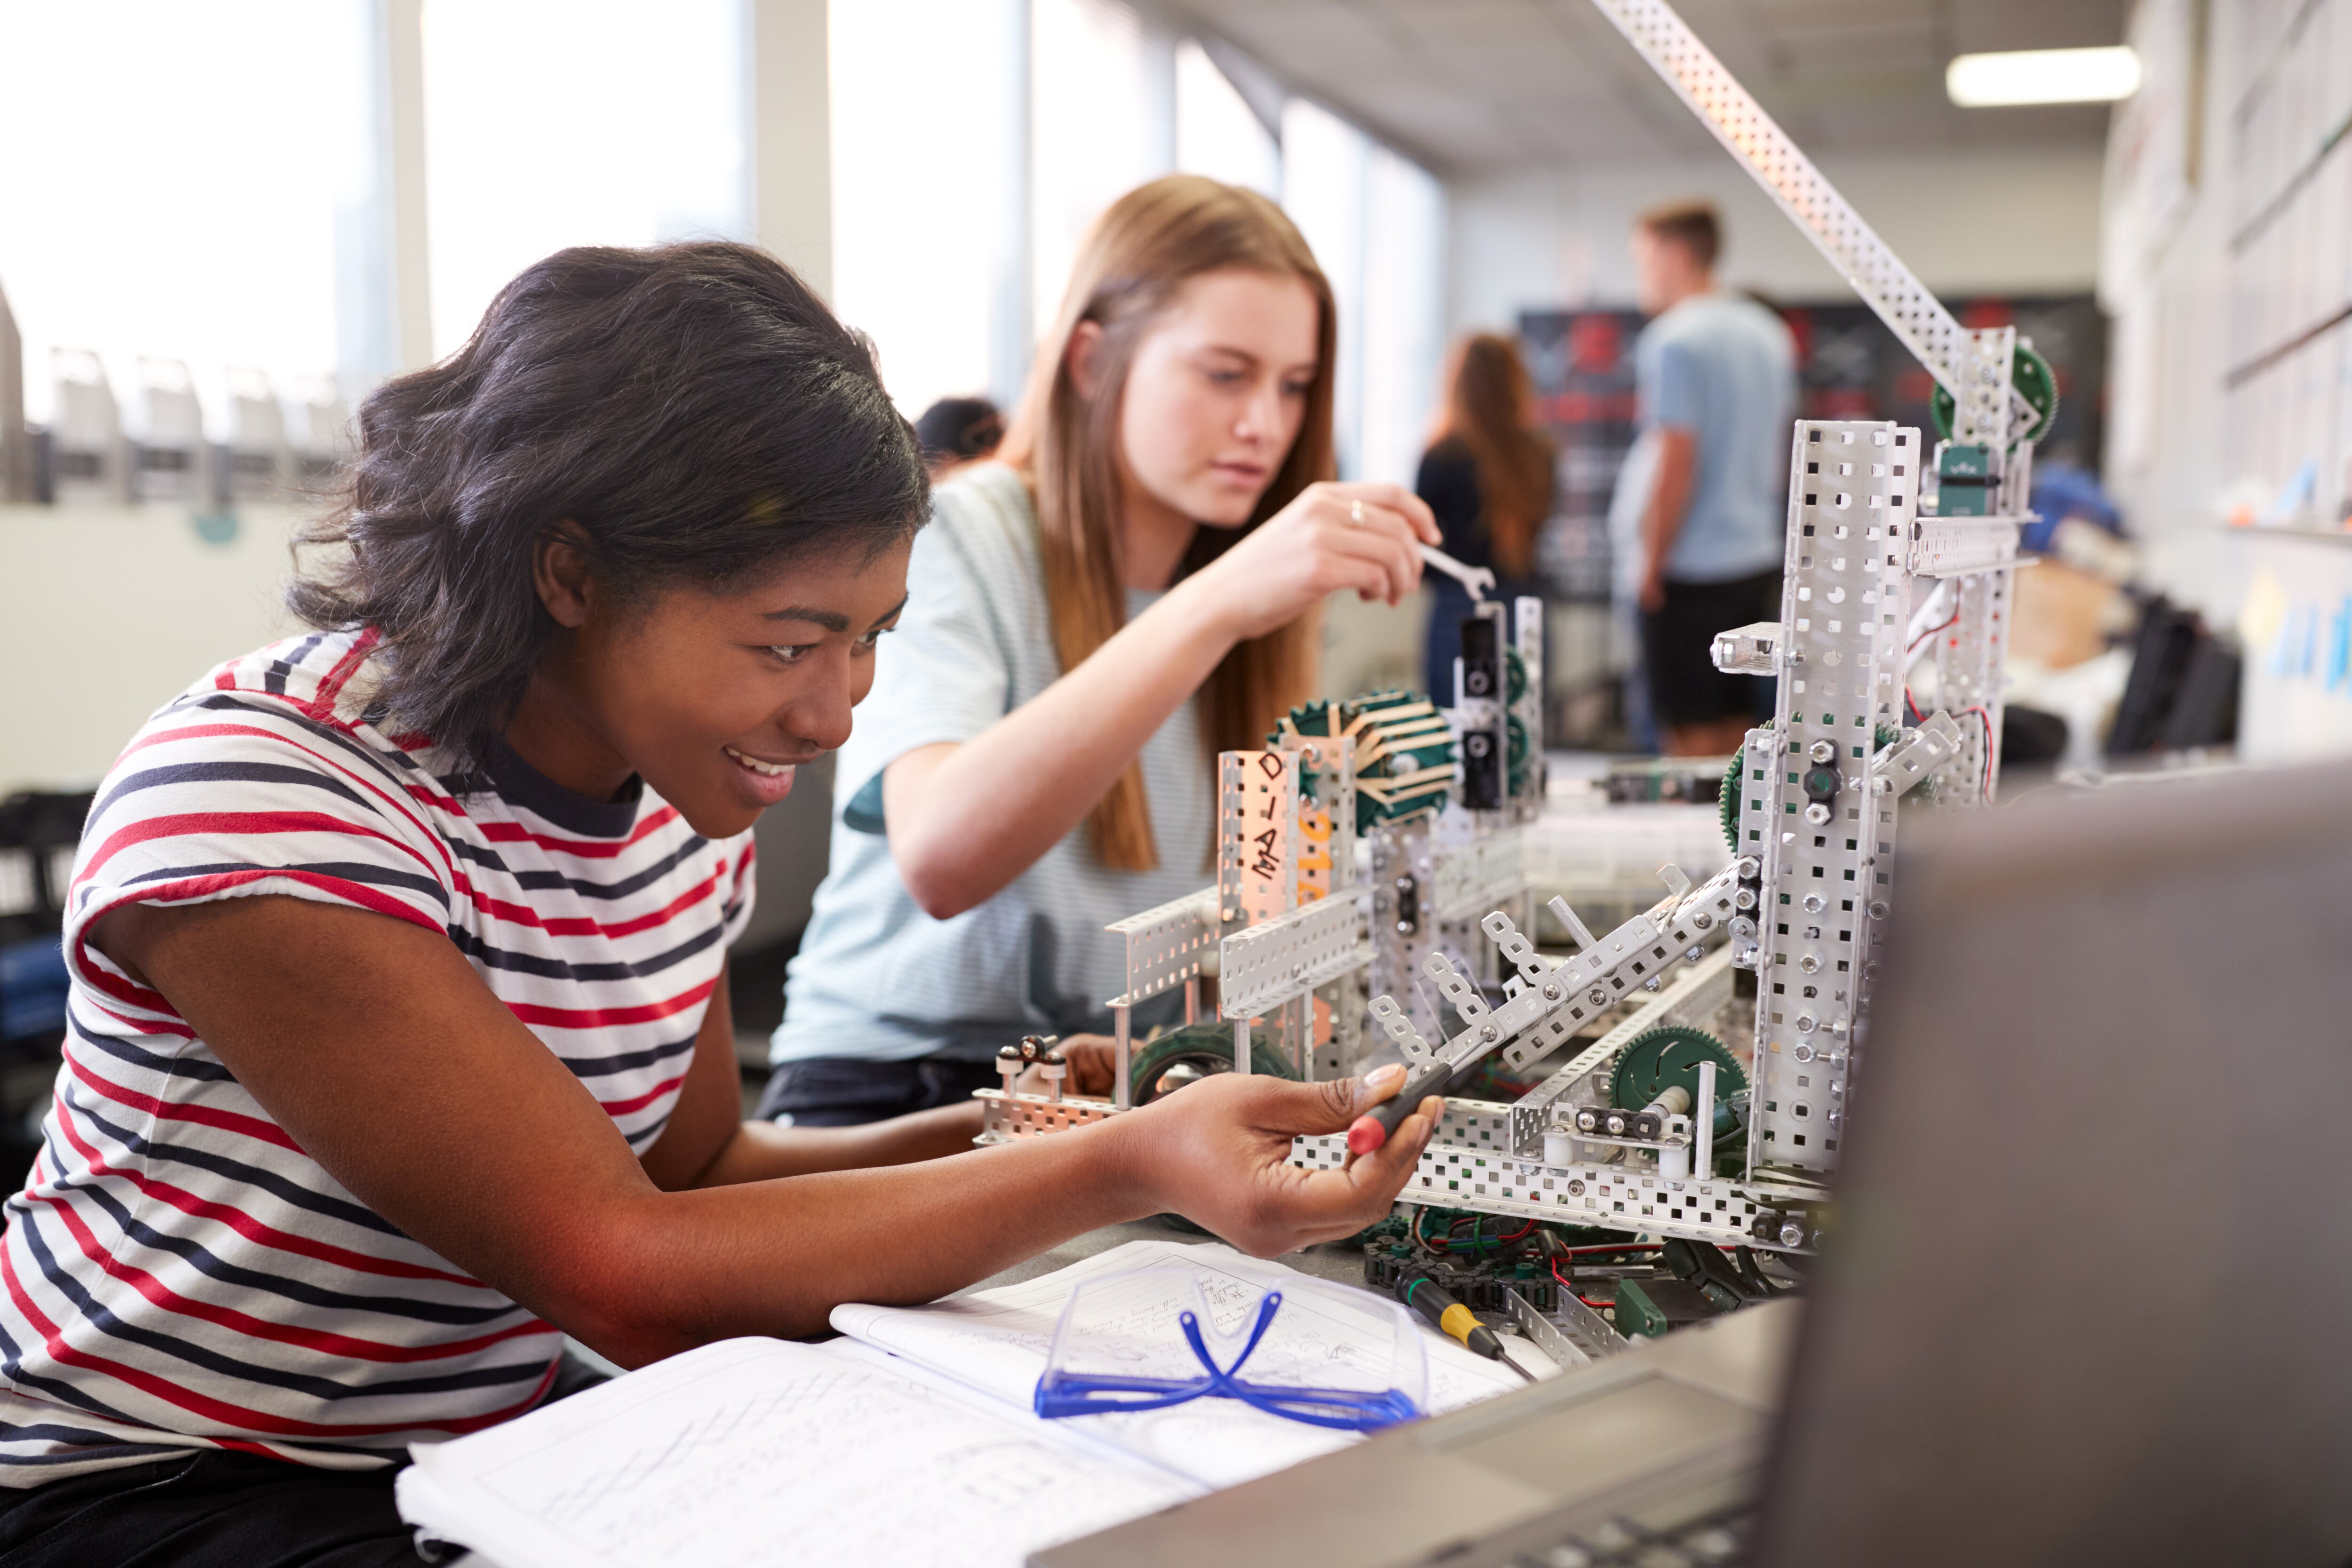 An image of a girl creating a robot in her engineering class